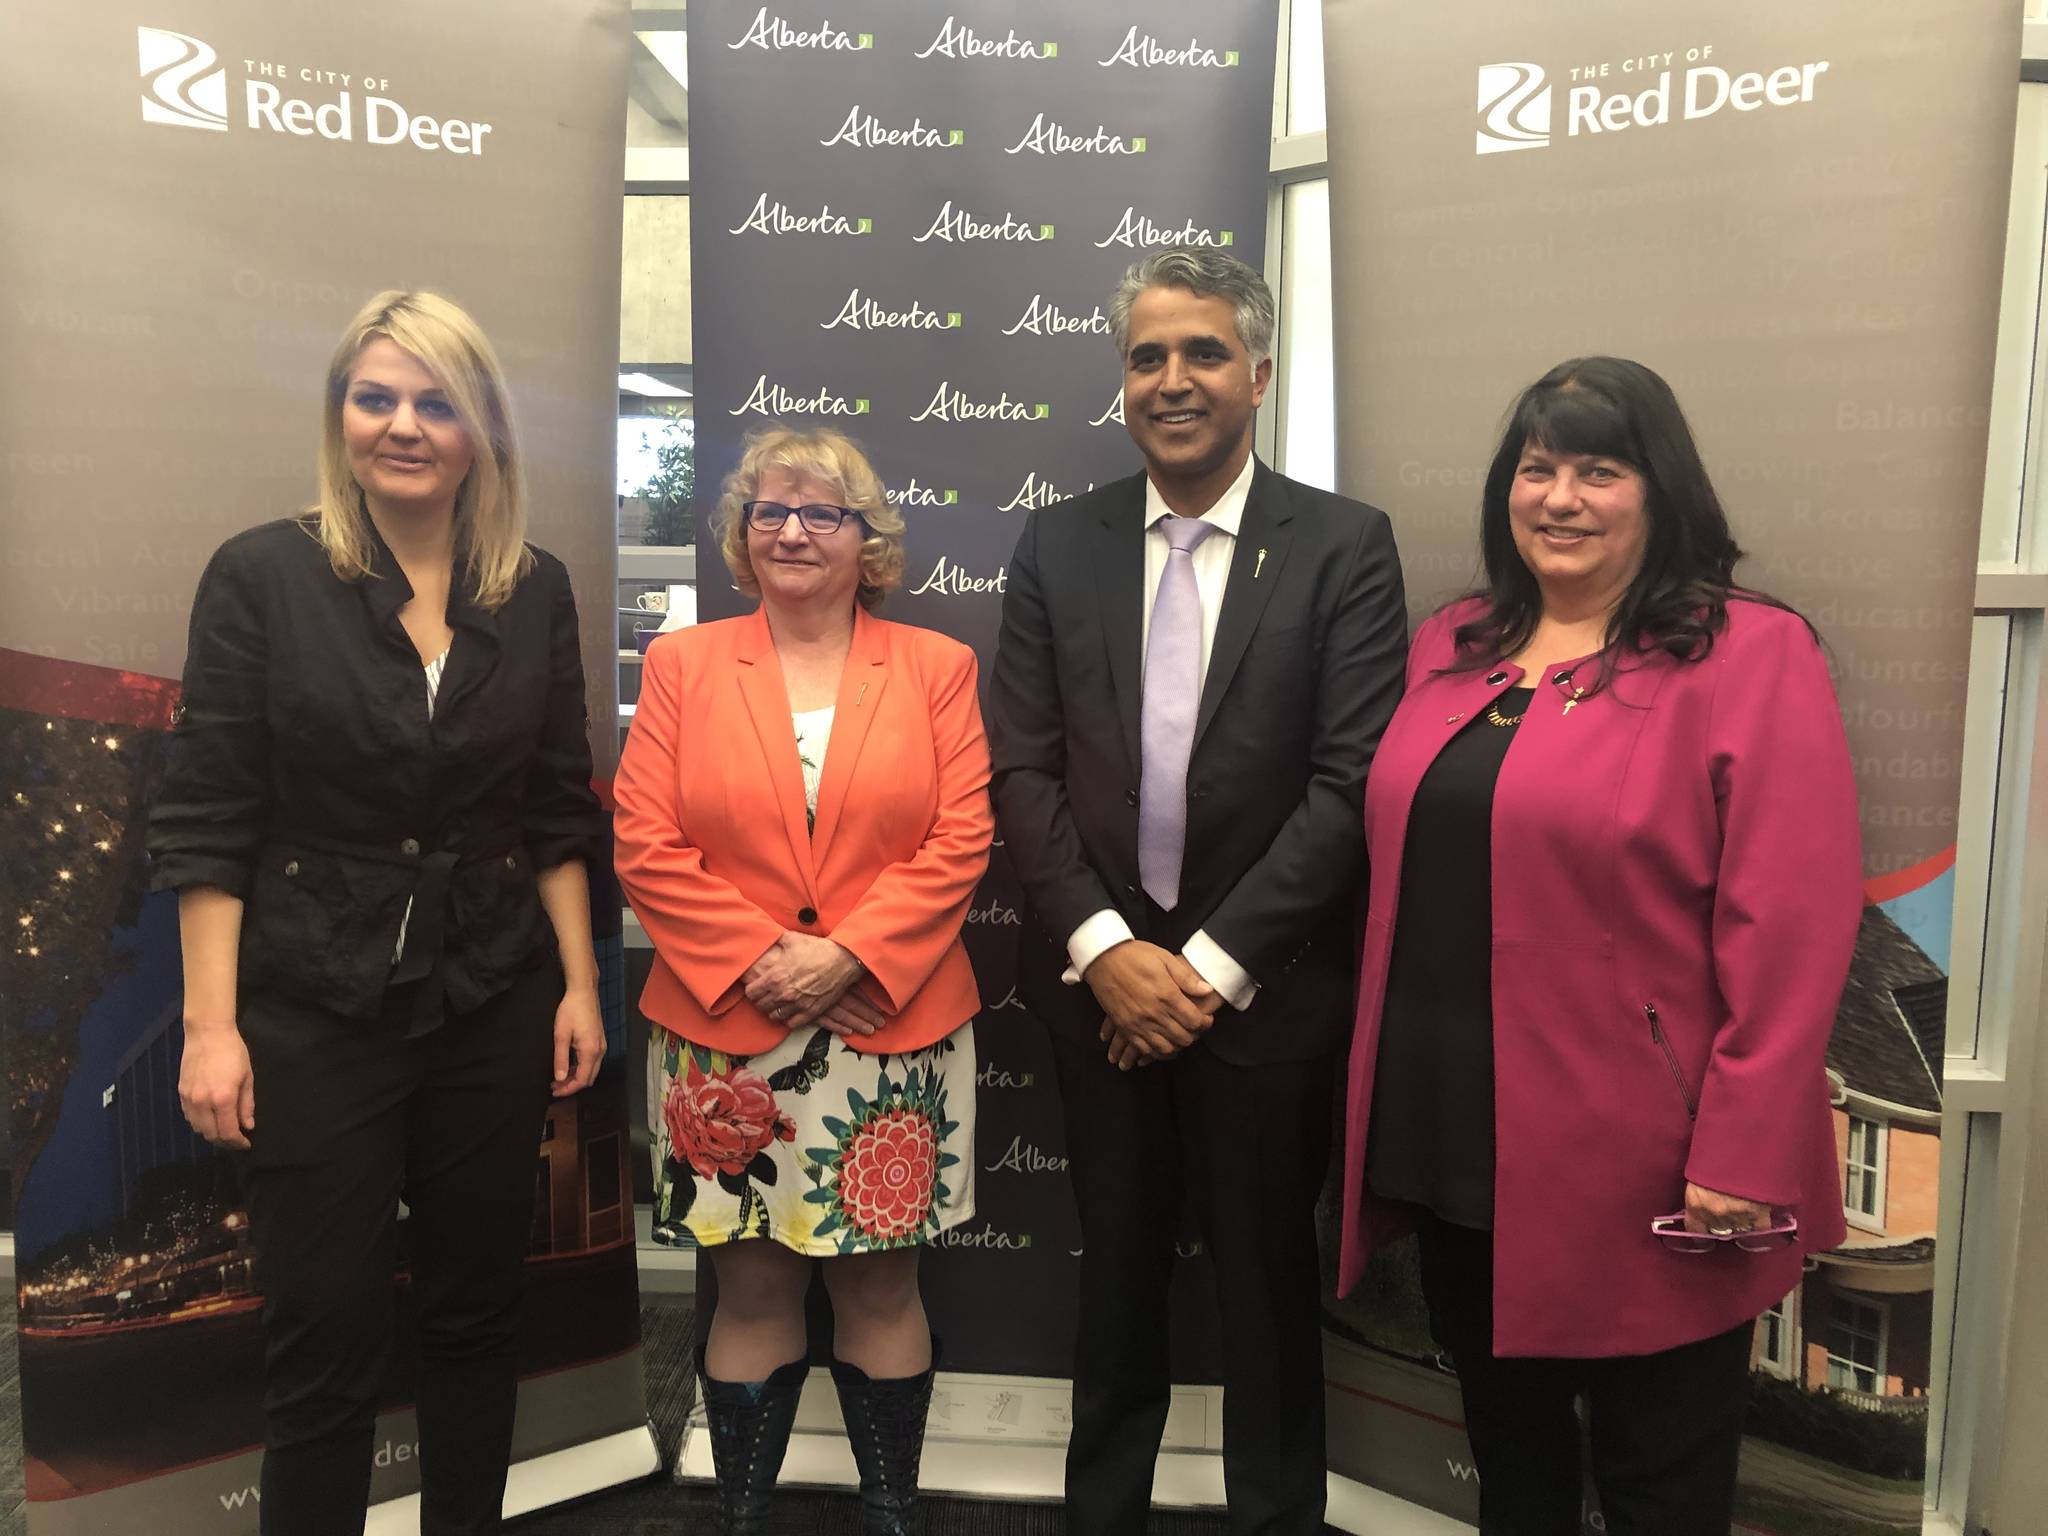 Mayor Tara Veer, MLA for Red Deer-South Barb Miller, Minister of Community and Social Services Irfan Sabir and MLA for Red Deer-North Kim Schreiner pose for a photo after the news conference announcing $7 million for a new homeless shelter. Robin Grant/Red Deer Express